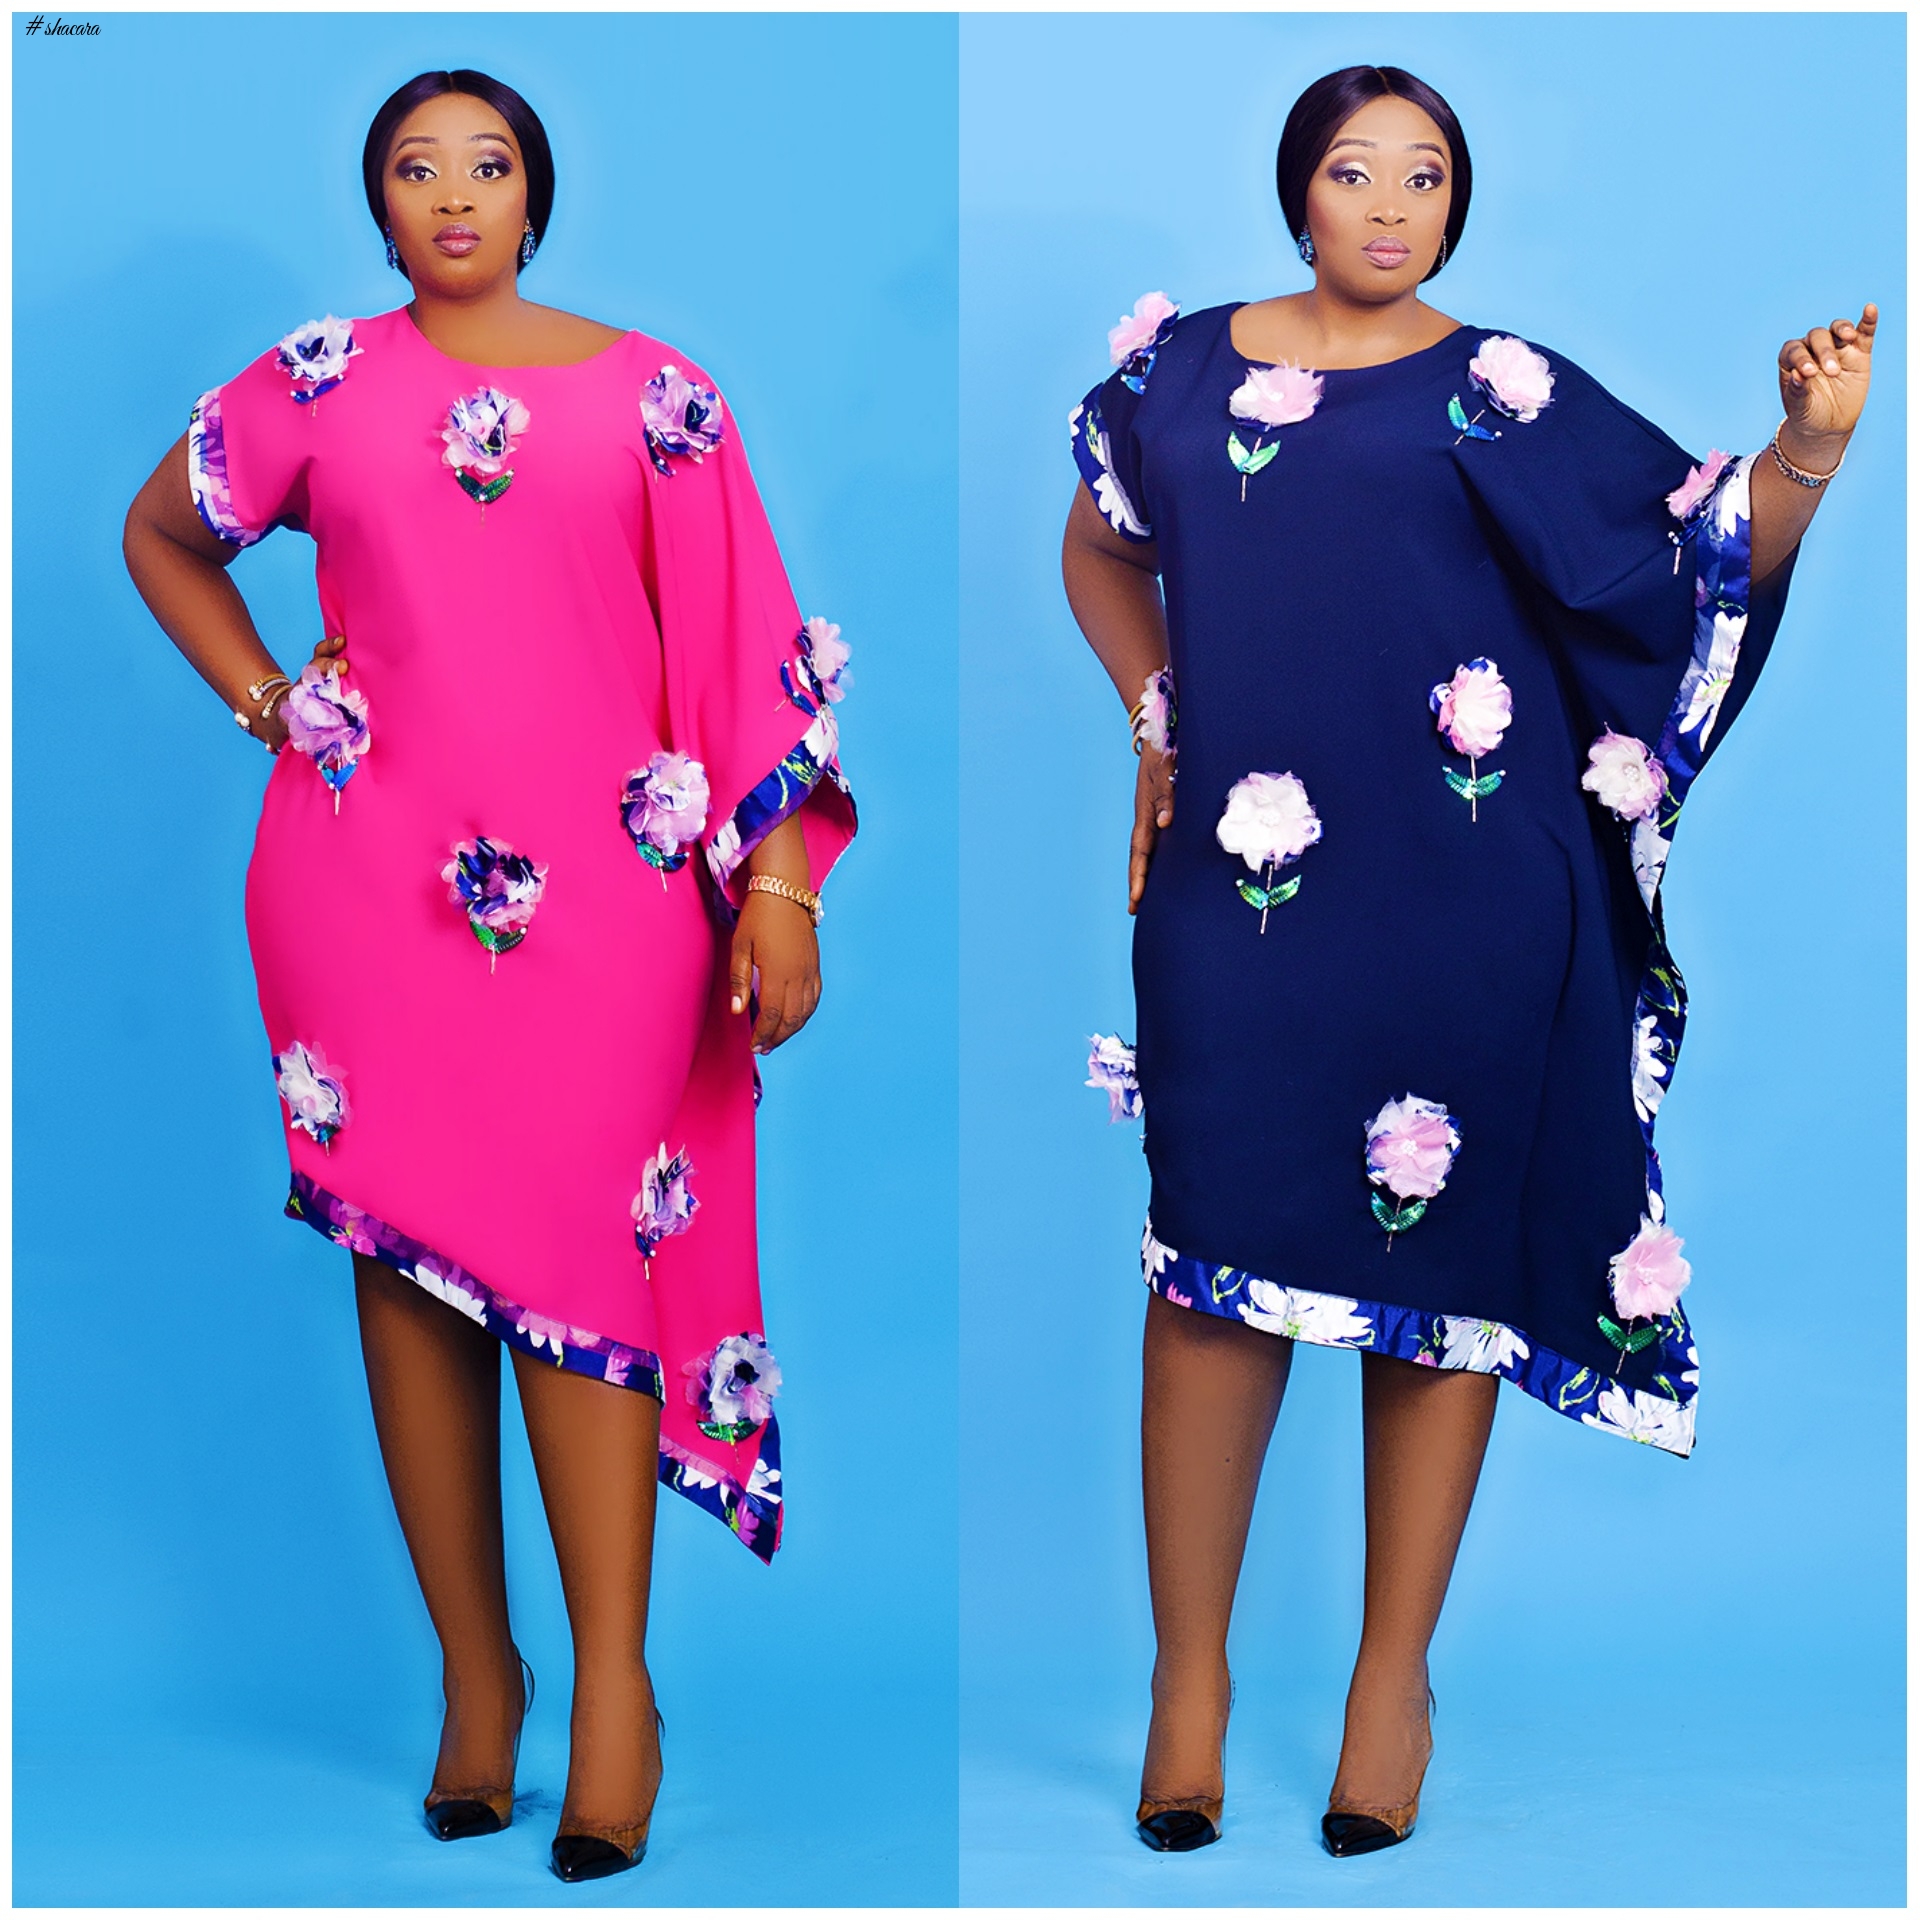 Plus Size Brand Makioba Releases Its SS17 Mid-Season Collection ‘Efflorescence’